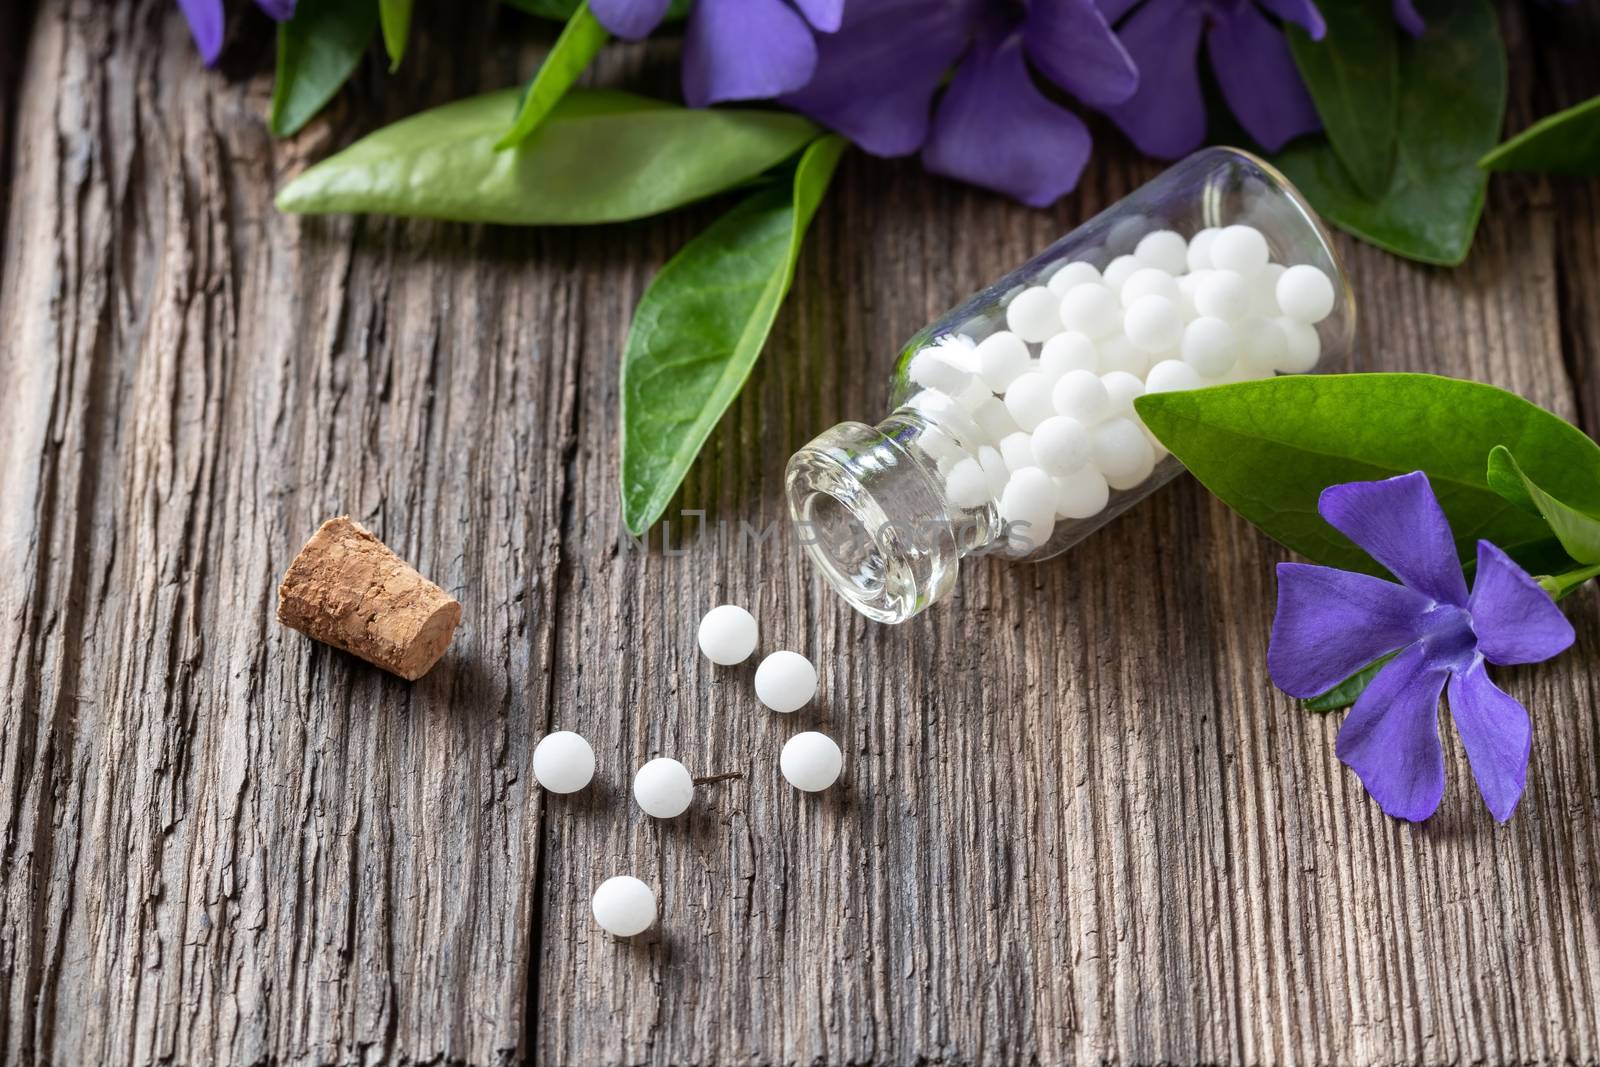 A bottle of homeopathic pills with vinca minor plant by madeleine_steinbach